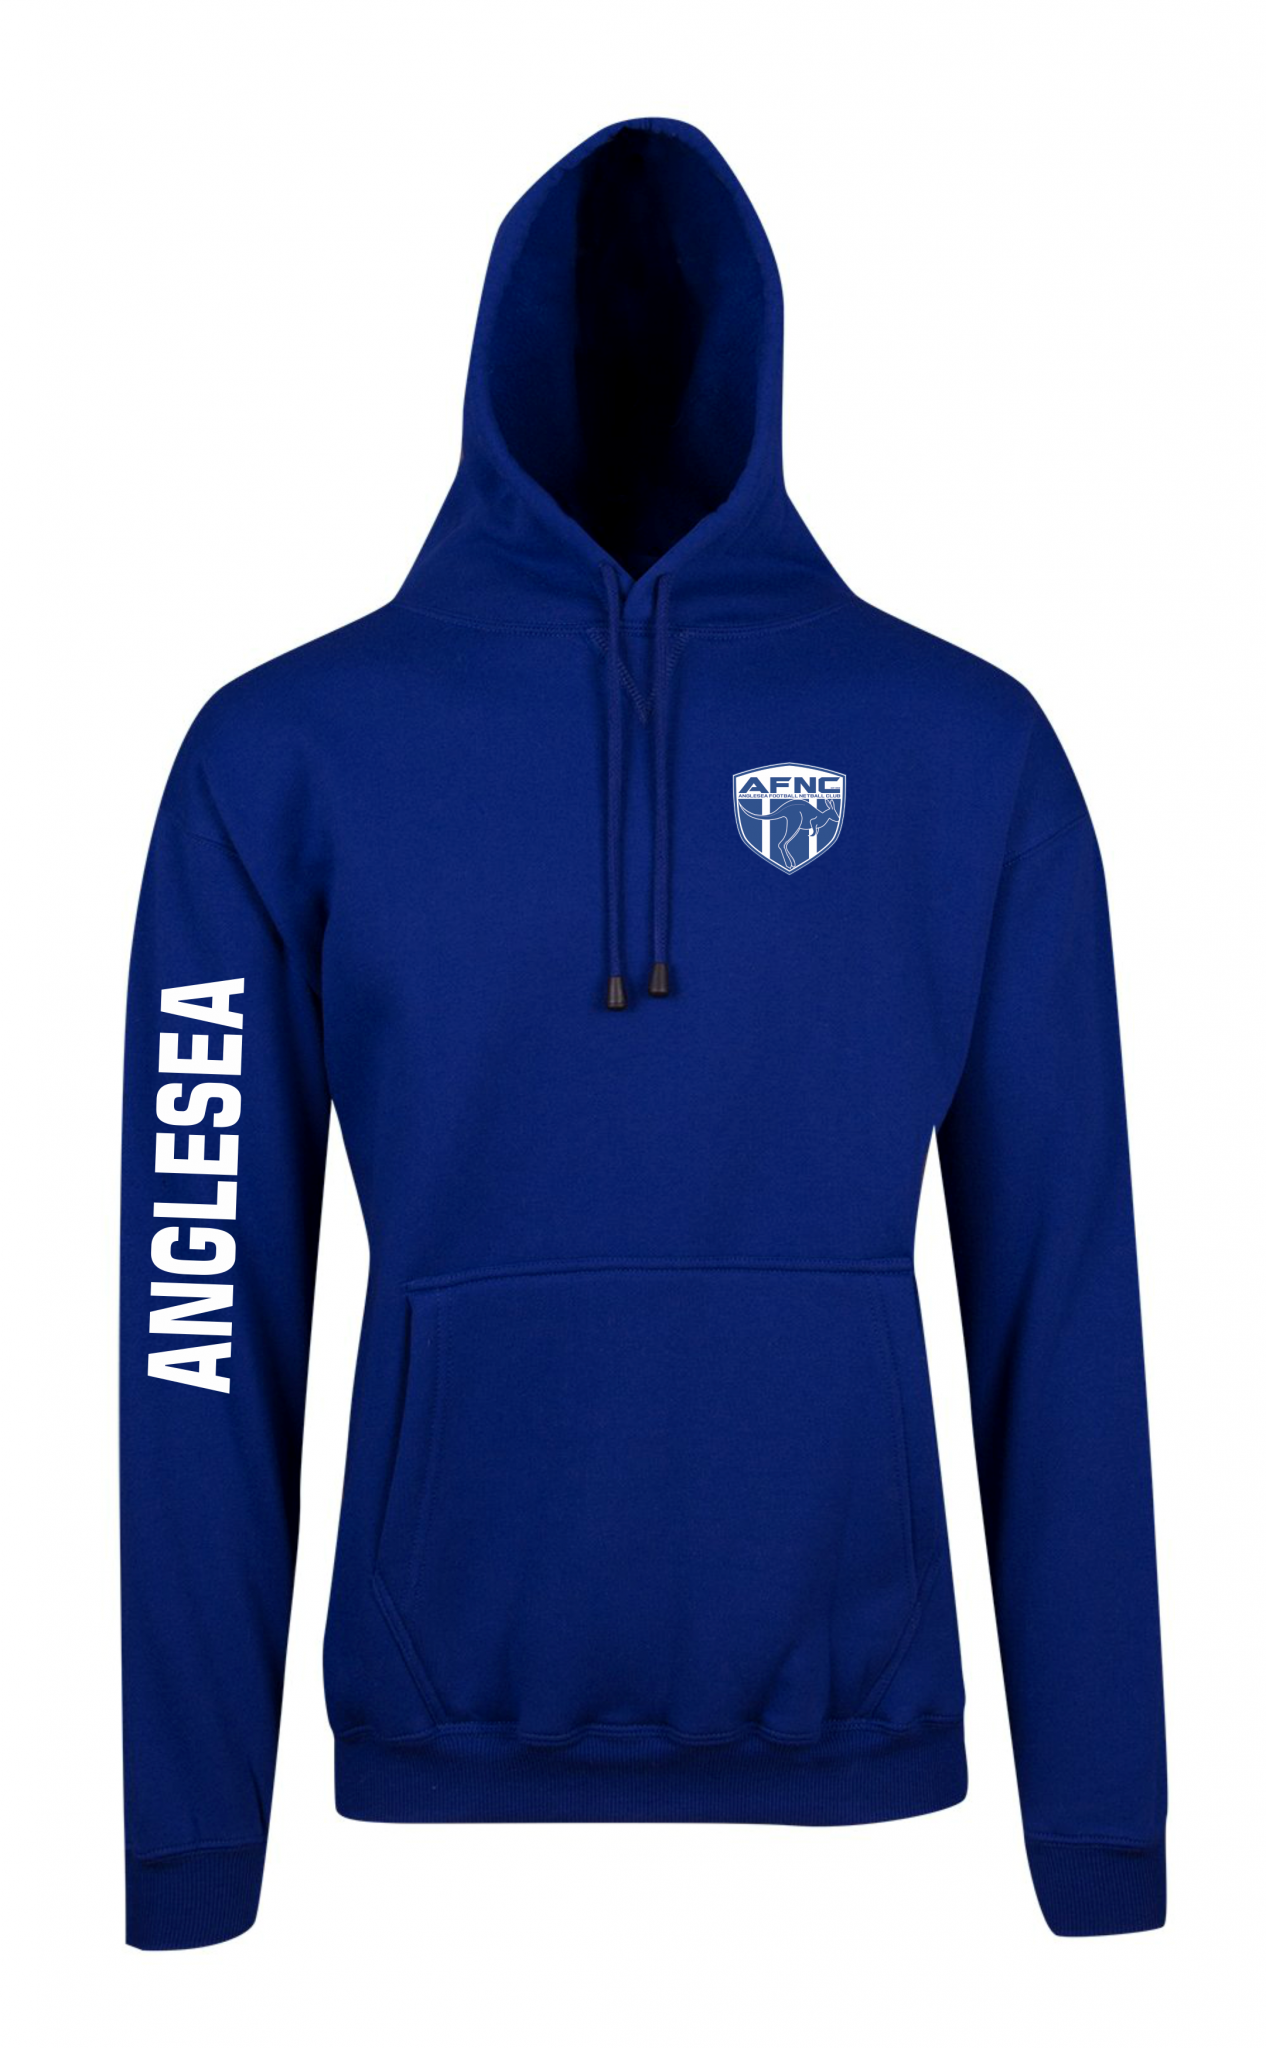 Unisex Adult Hoodie - Royal Blue — Promote-It Trophy & Clothing Co.